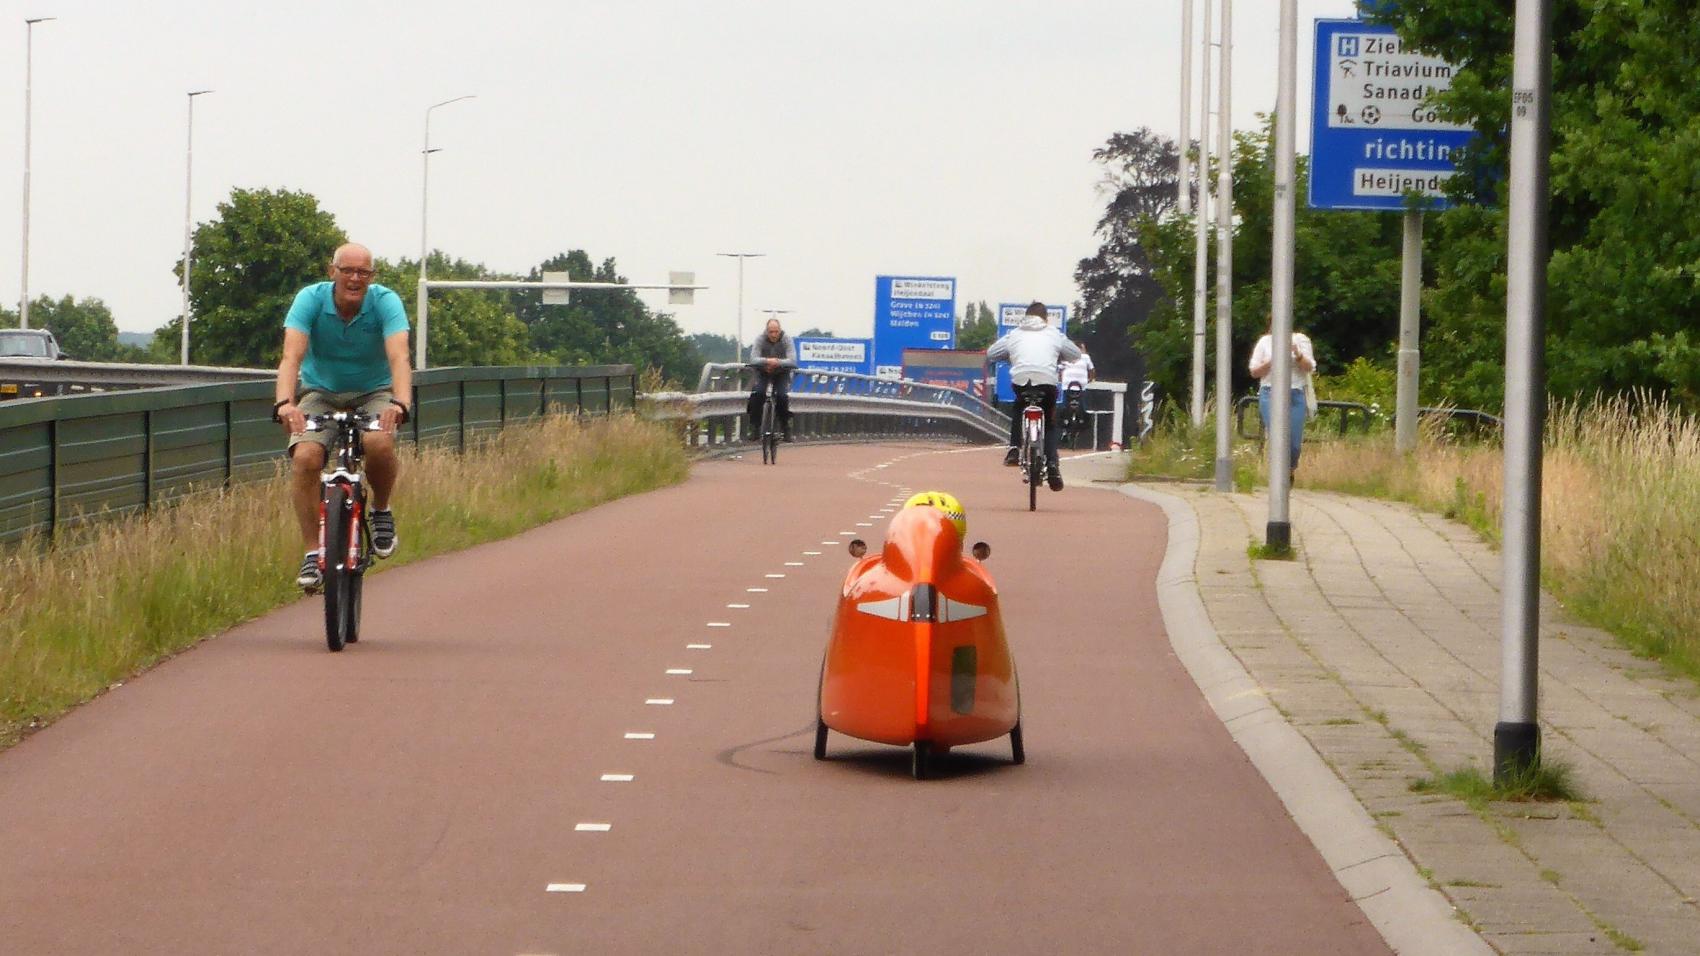 Bridge over the Maas-Waal canal. Low barrier between the carriageway and the cycling path reduces the noise from cars, but does not affect negatively social safety.